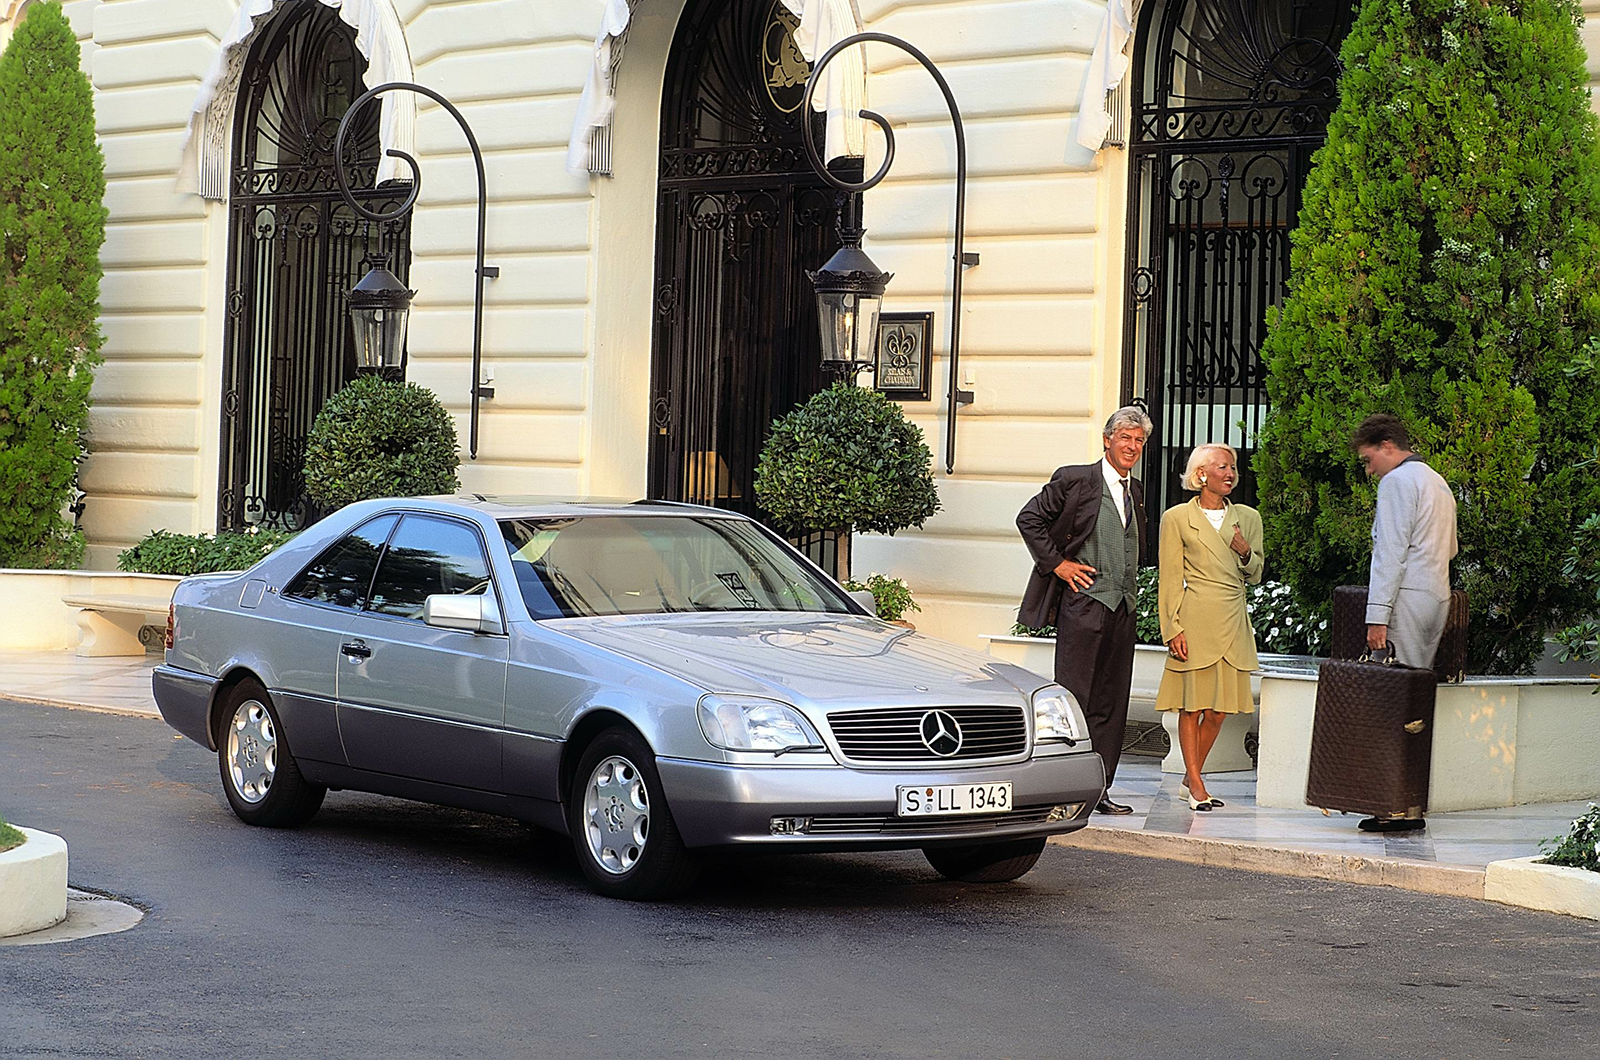 This Old, Unsexy Mercedes Was One of the Best Cars the Company